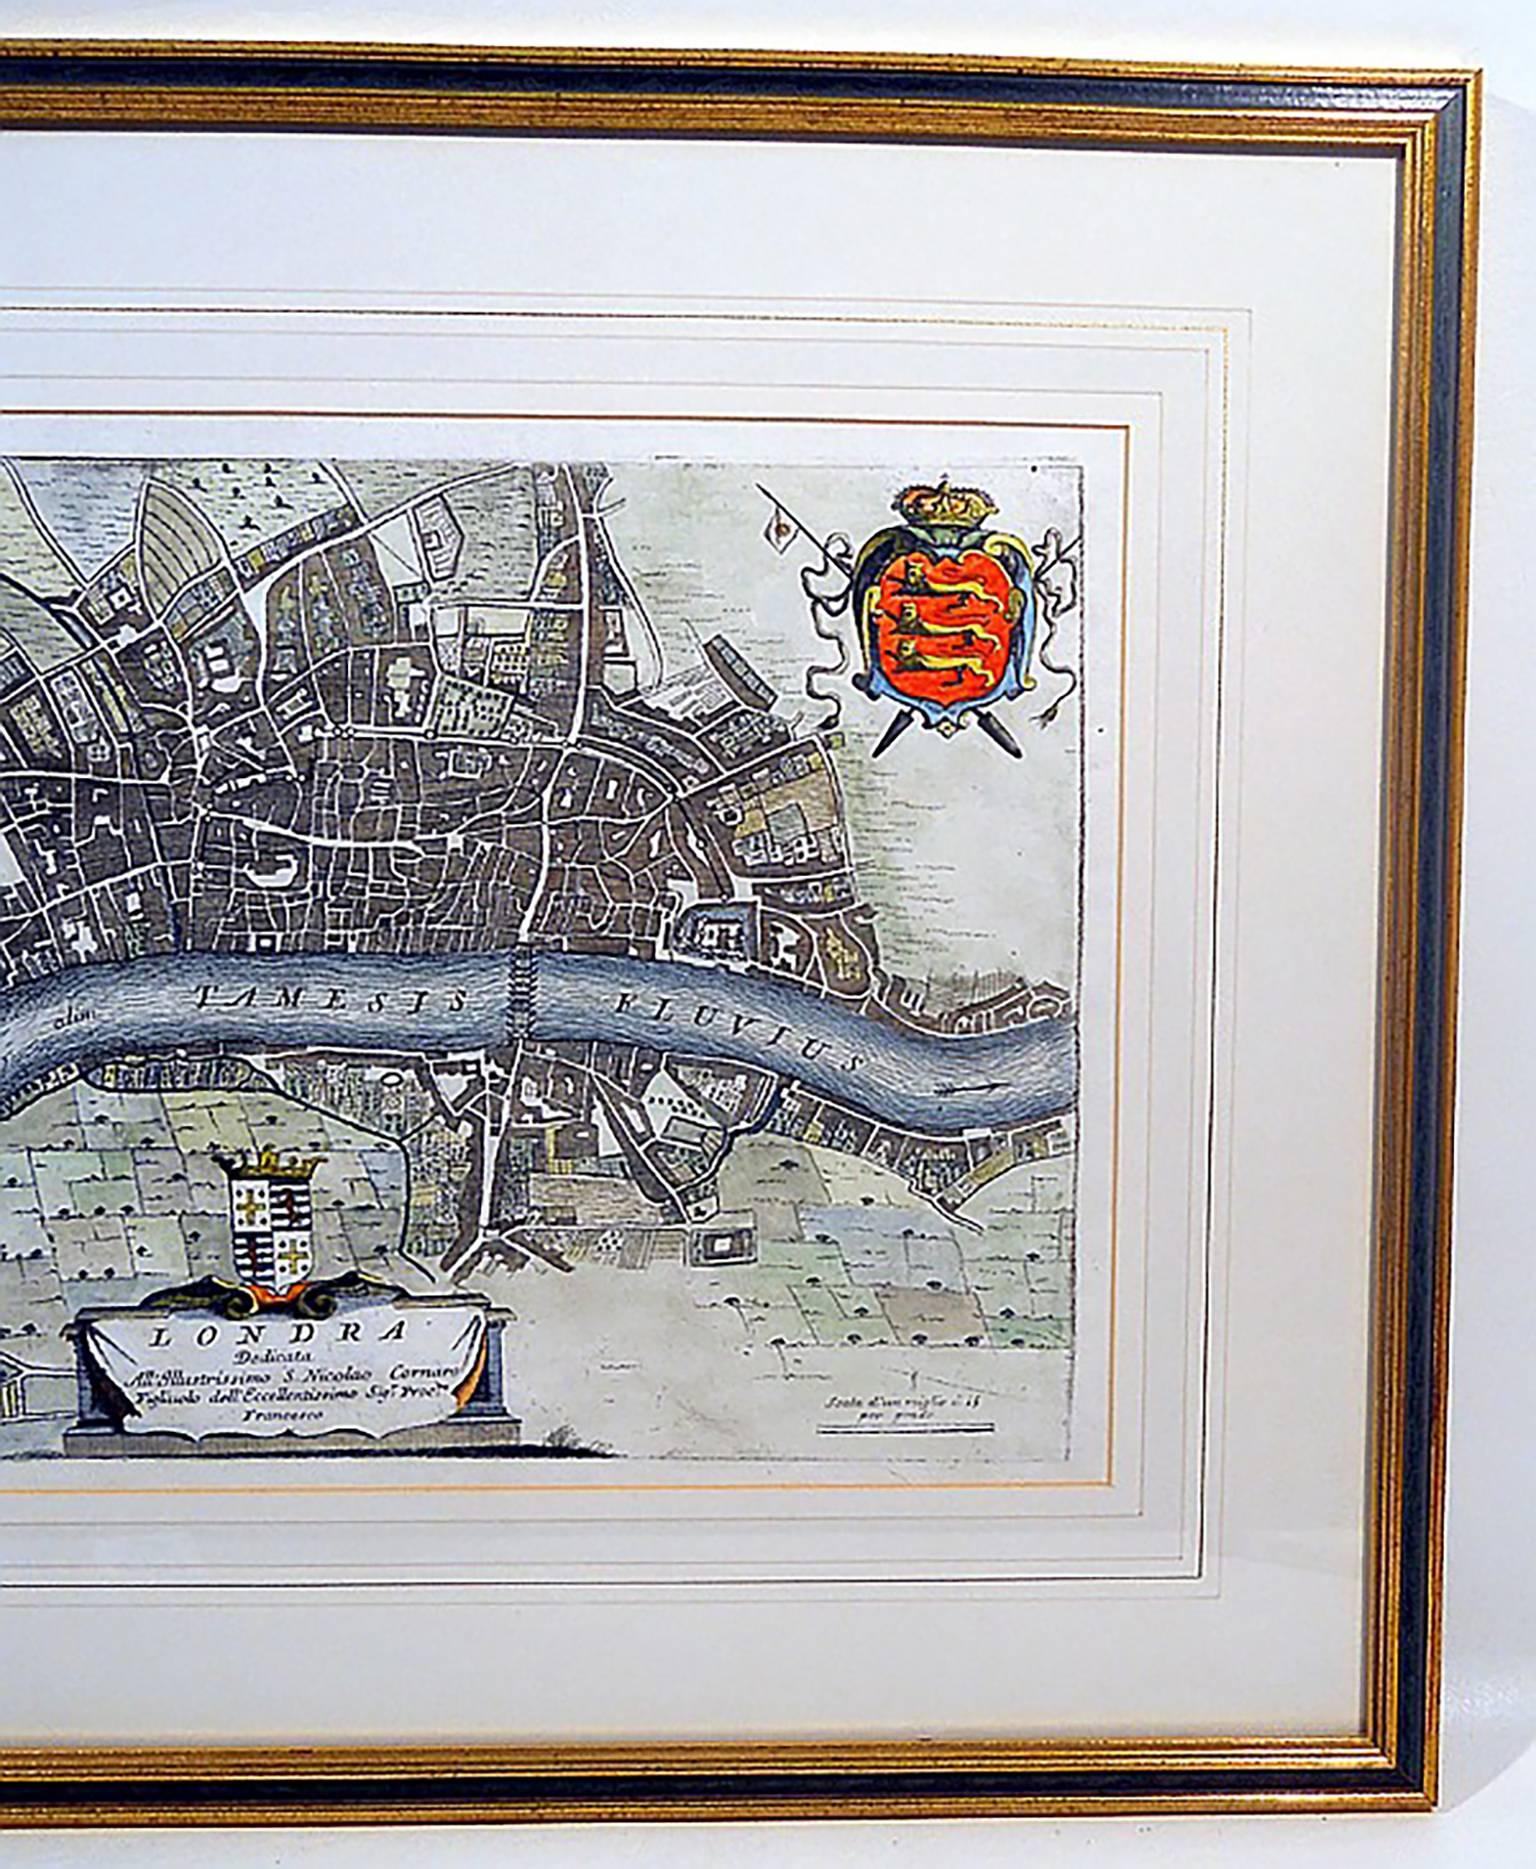 Amazing Beautiful Original Hand-Colored Engraved Map of London, England  Very Scarce Map Created in 1685 during the reign of James II  Map Engraved by Vincenzo Maria Coronelli in Venice, Italy circa 1685  Map is Entitled “Londra Dedicata